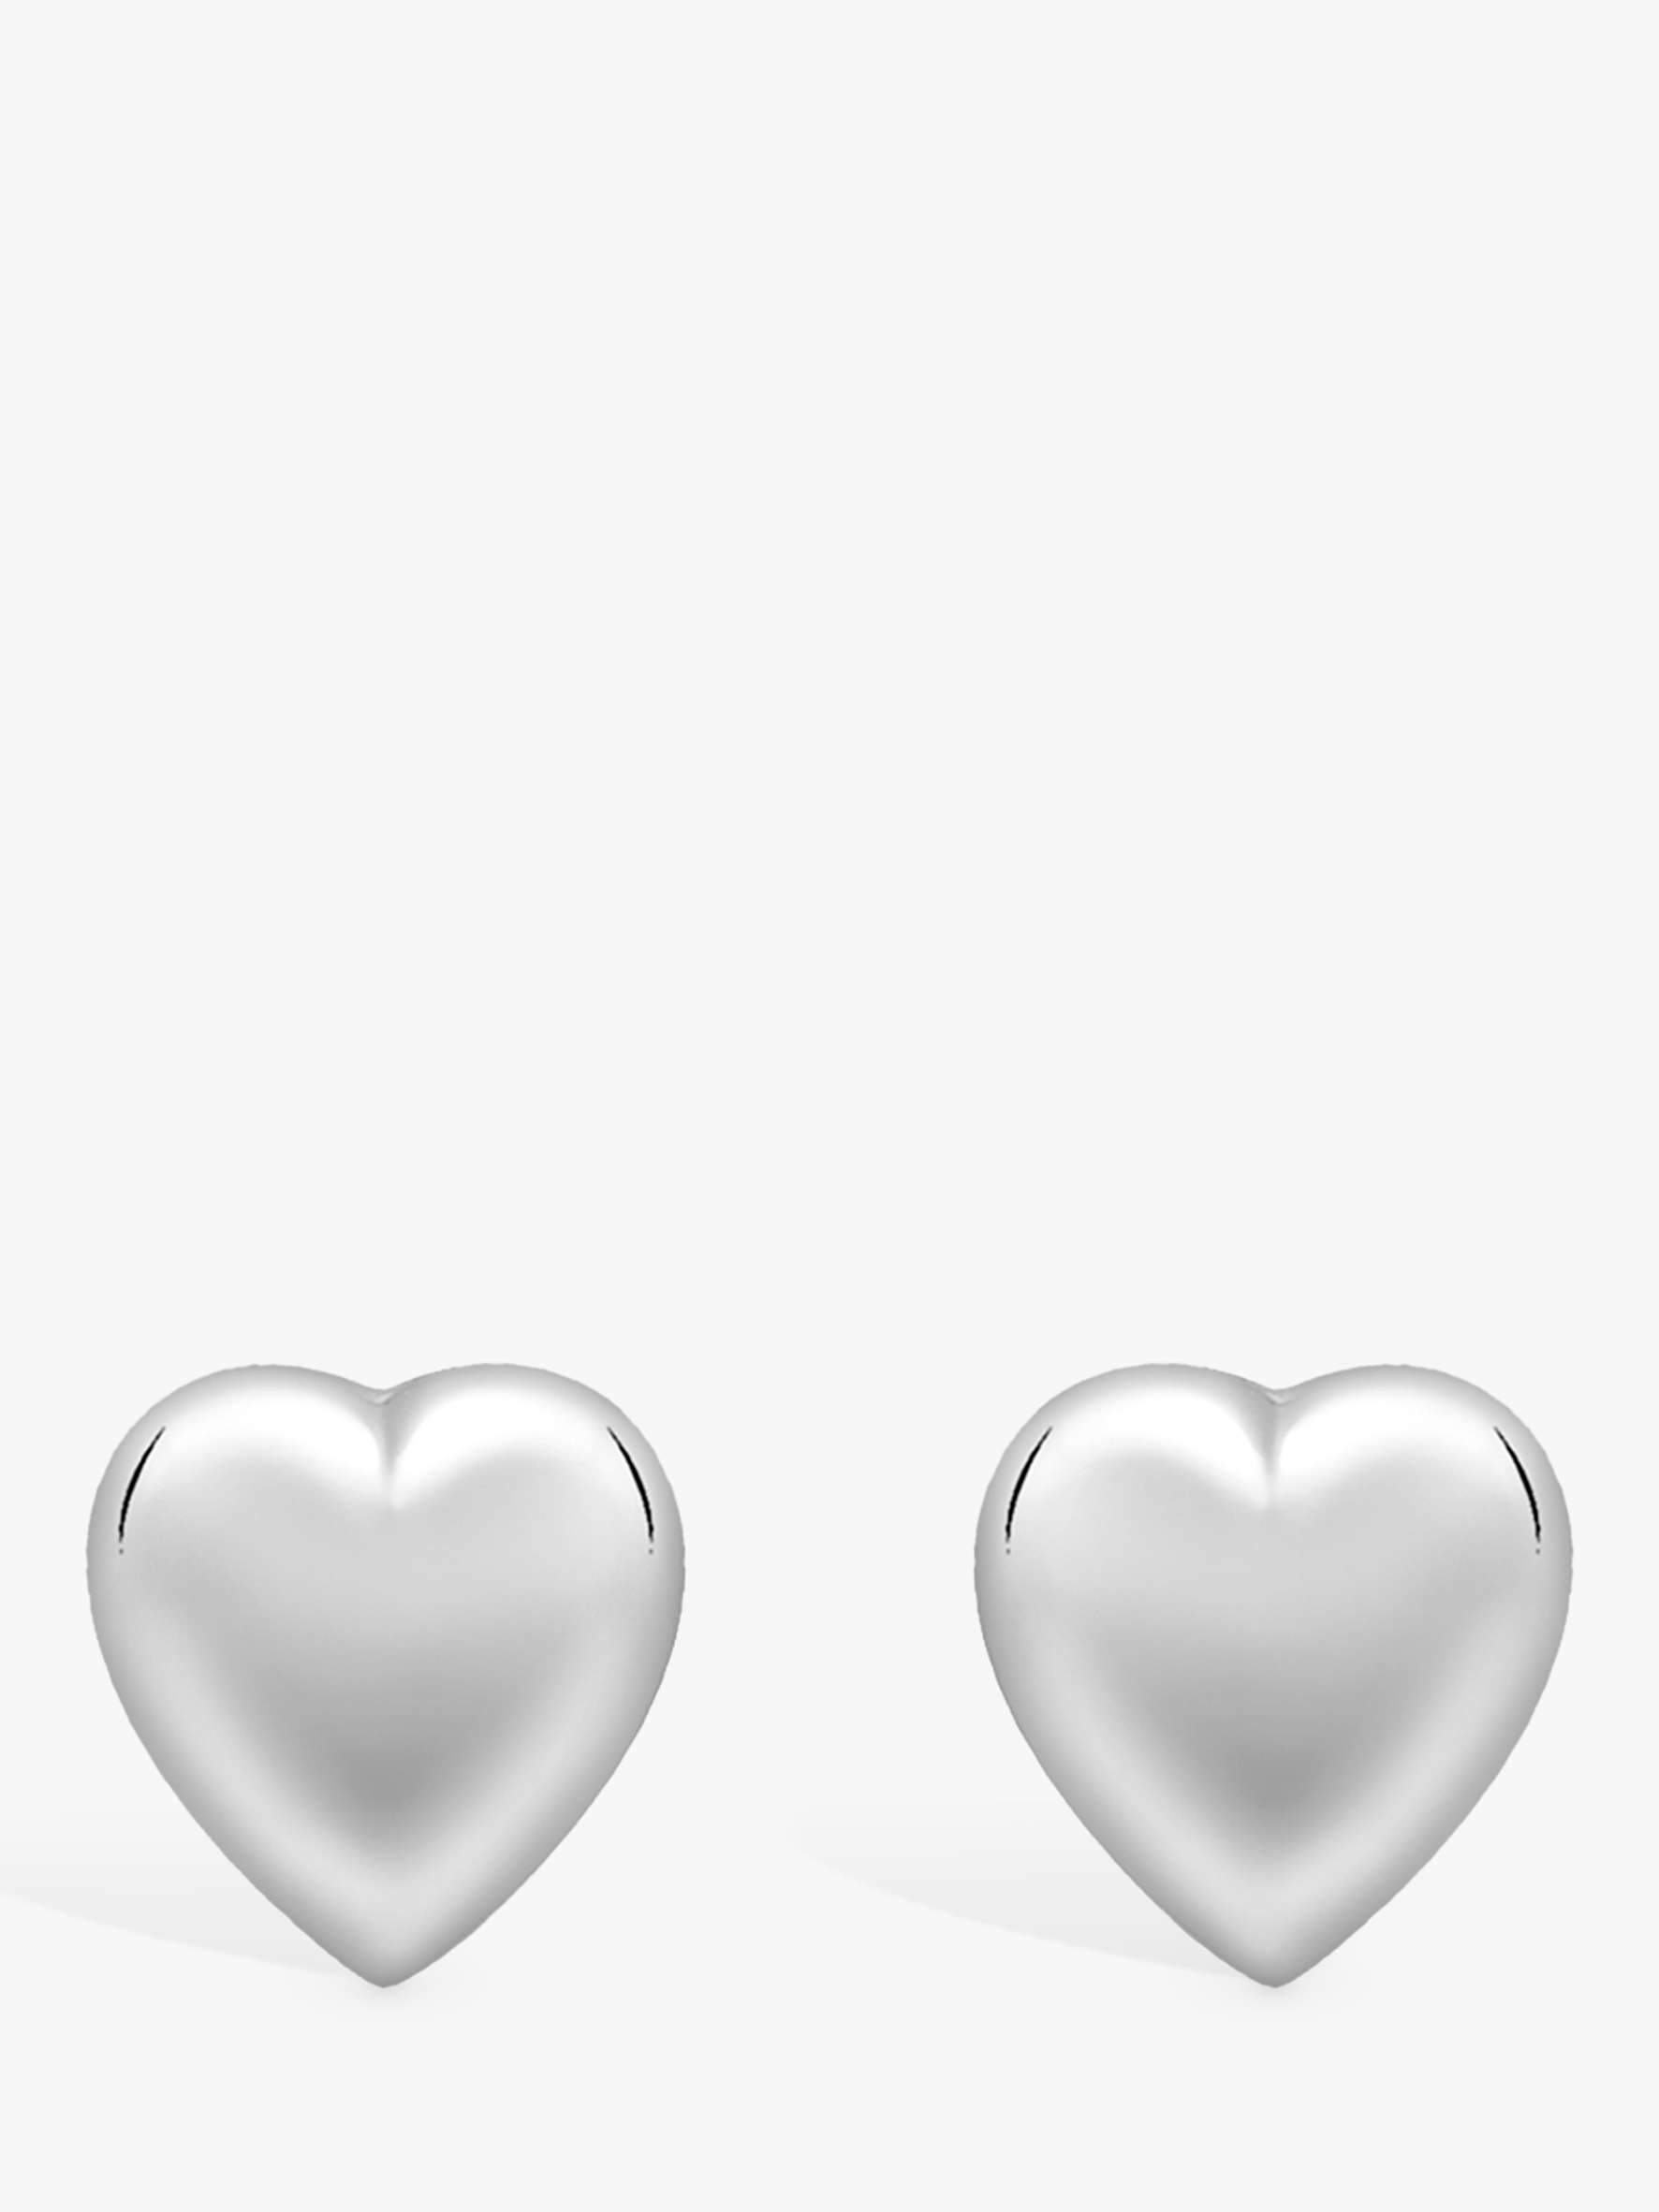 Buy IBB 9ct Gold Puff Heart Stud Earrings Online at johnlewis.com